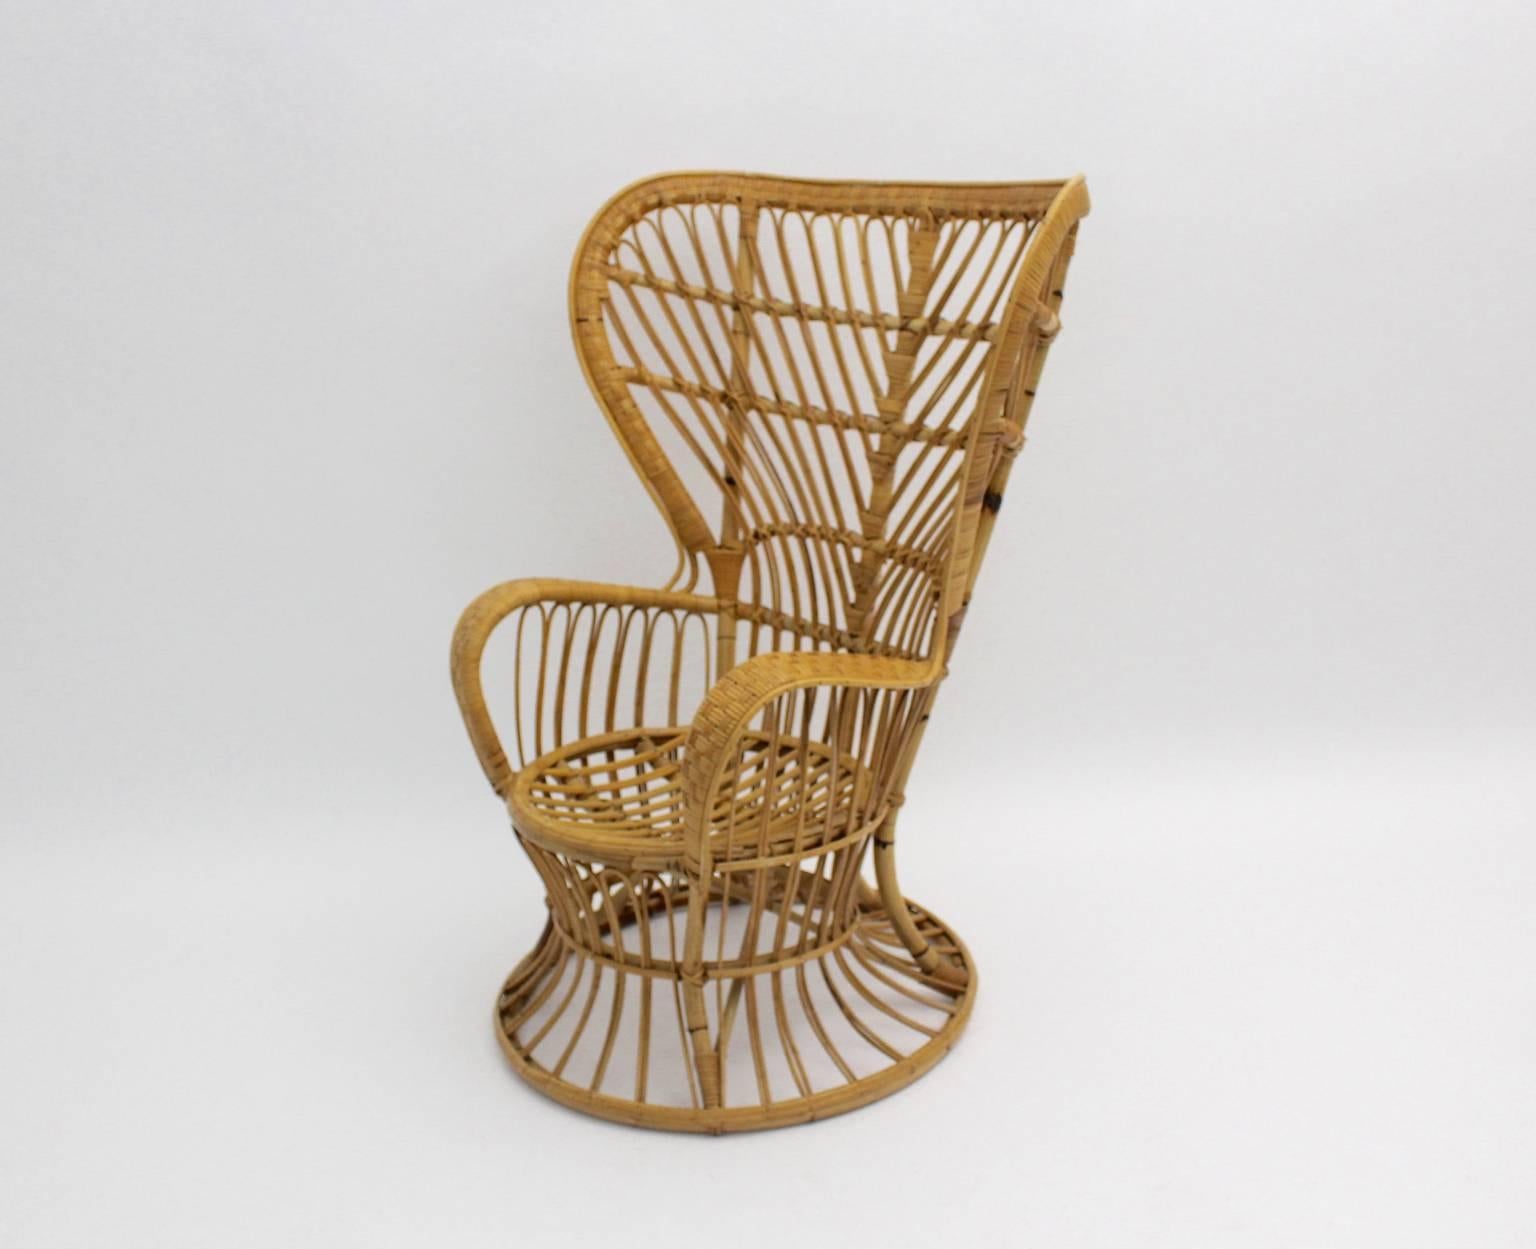 Riviera Style organic vintage lounge chairs, armchair or wingback chairs from rattan  designed by Lio Carminati, in the manner of Gio Ponti circa 1948 and manufactured in Italy, 1950s.
We offer from one up to six chairs. 
The rattan work